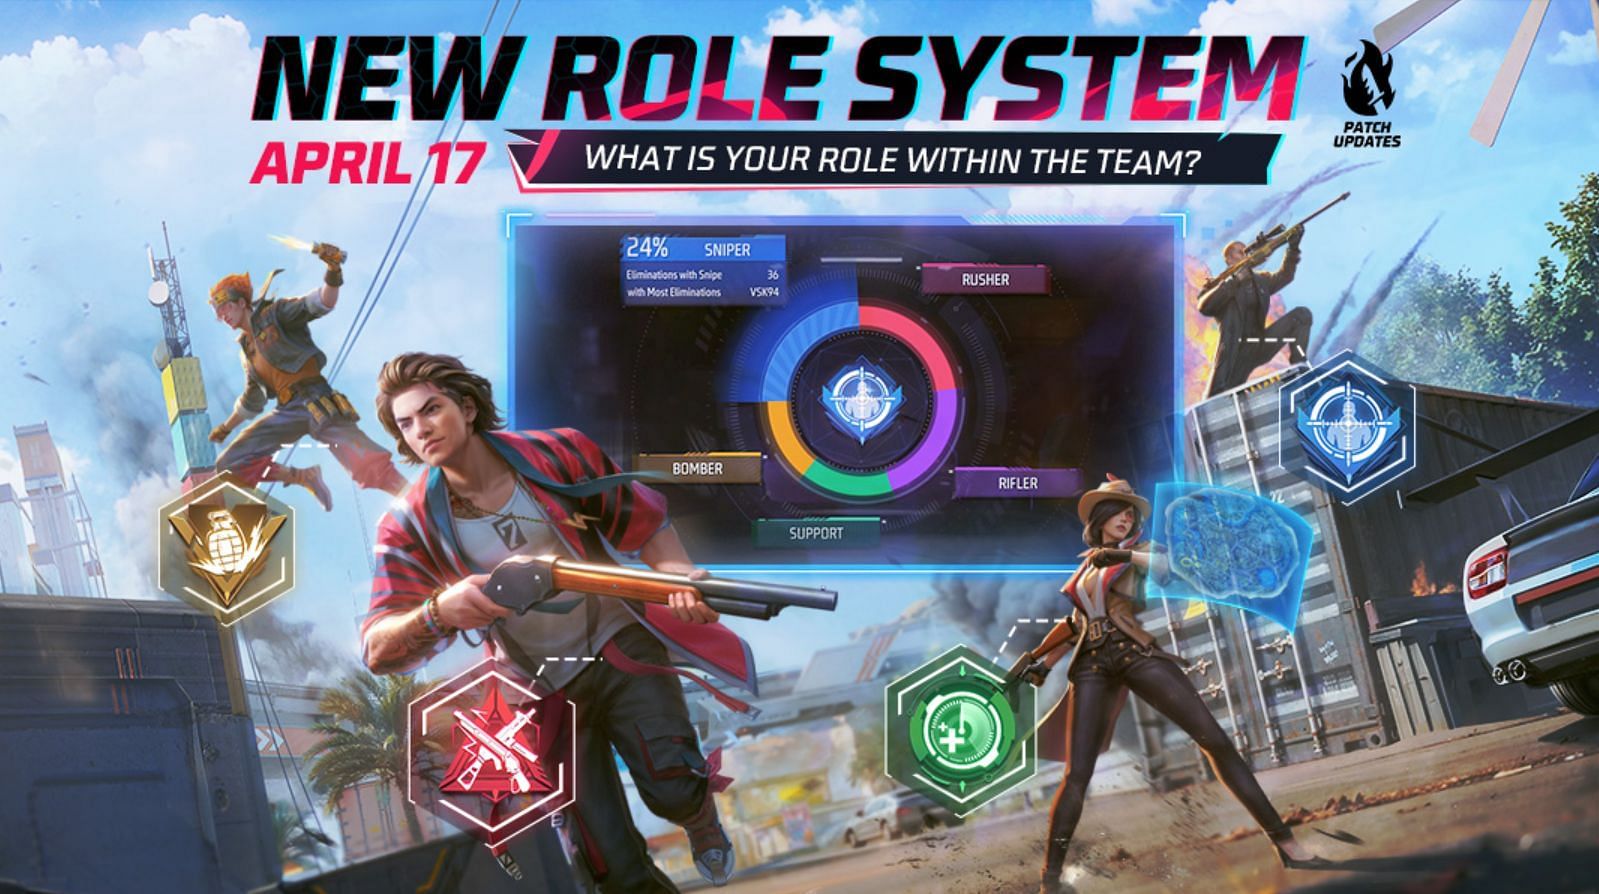 New role system in the game (Image via Garena)